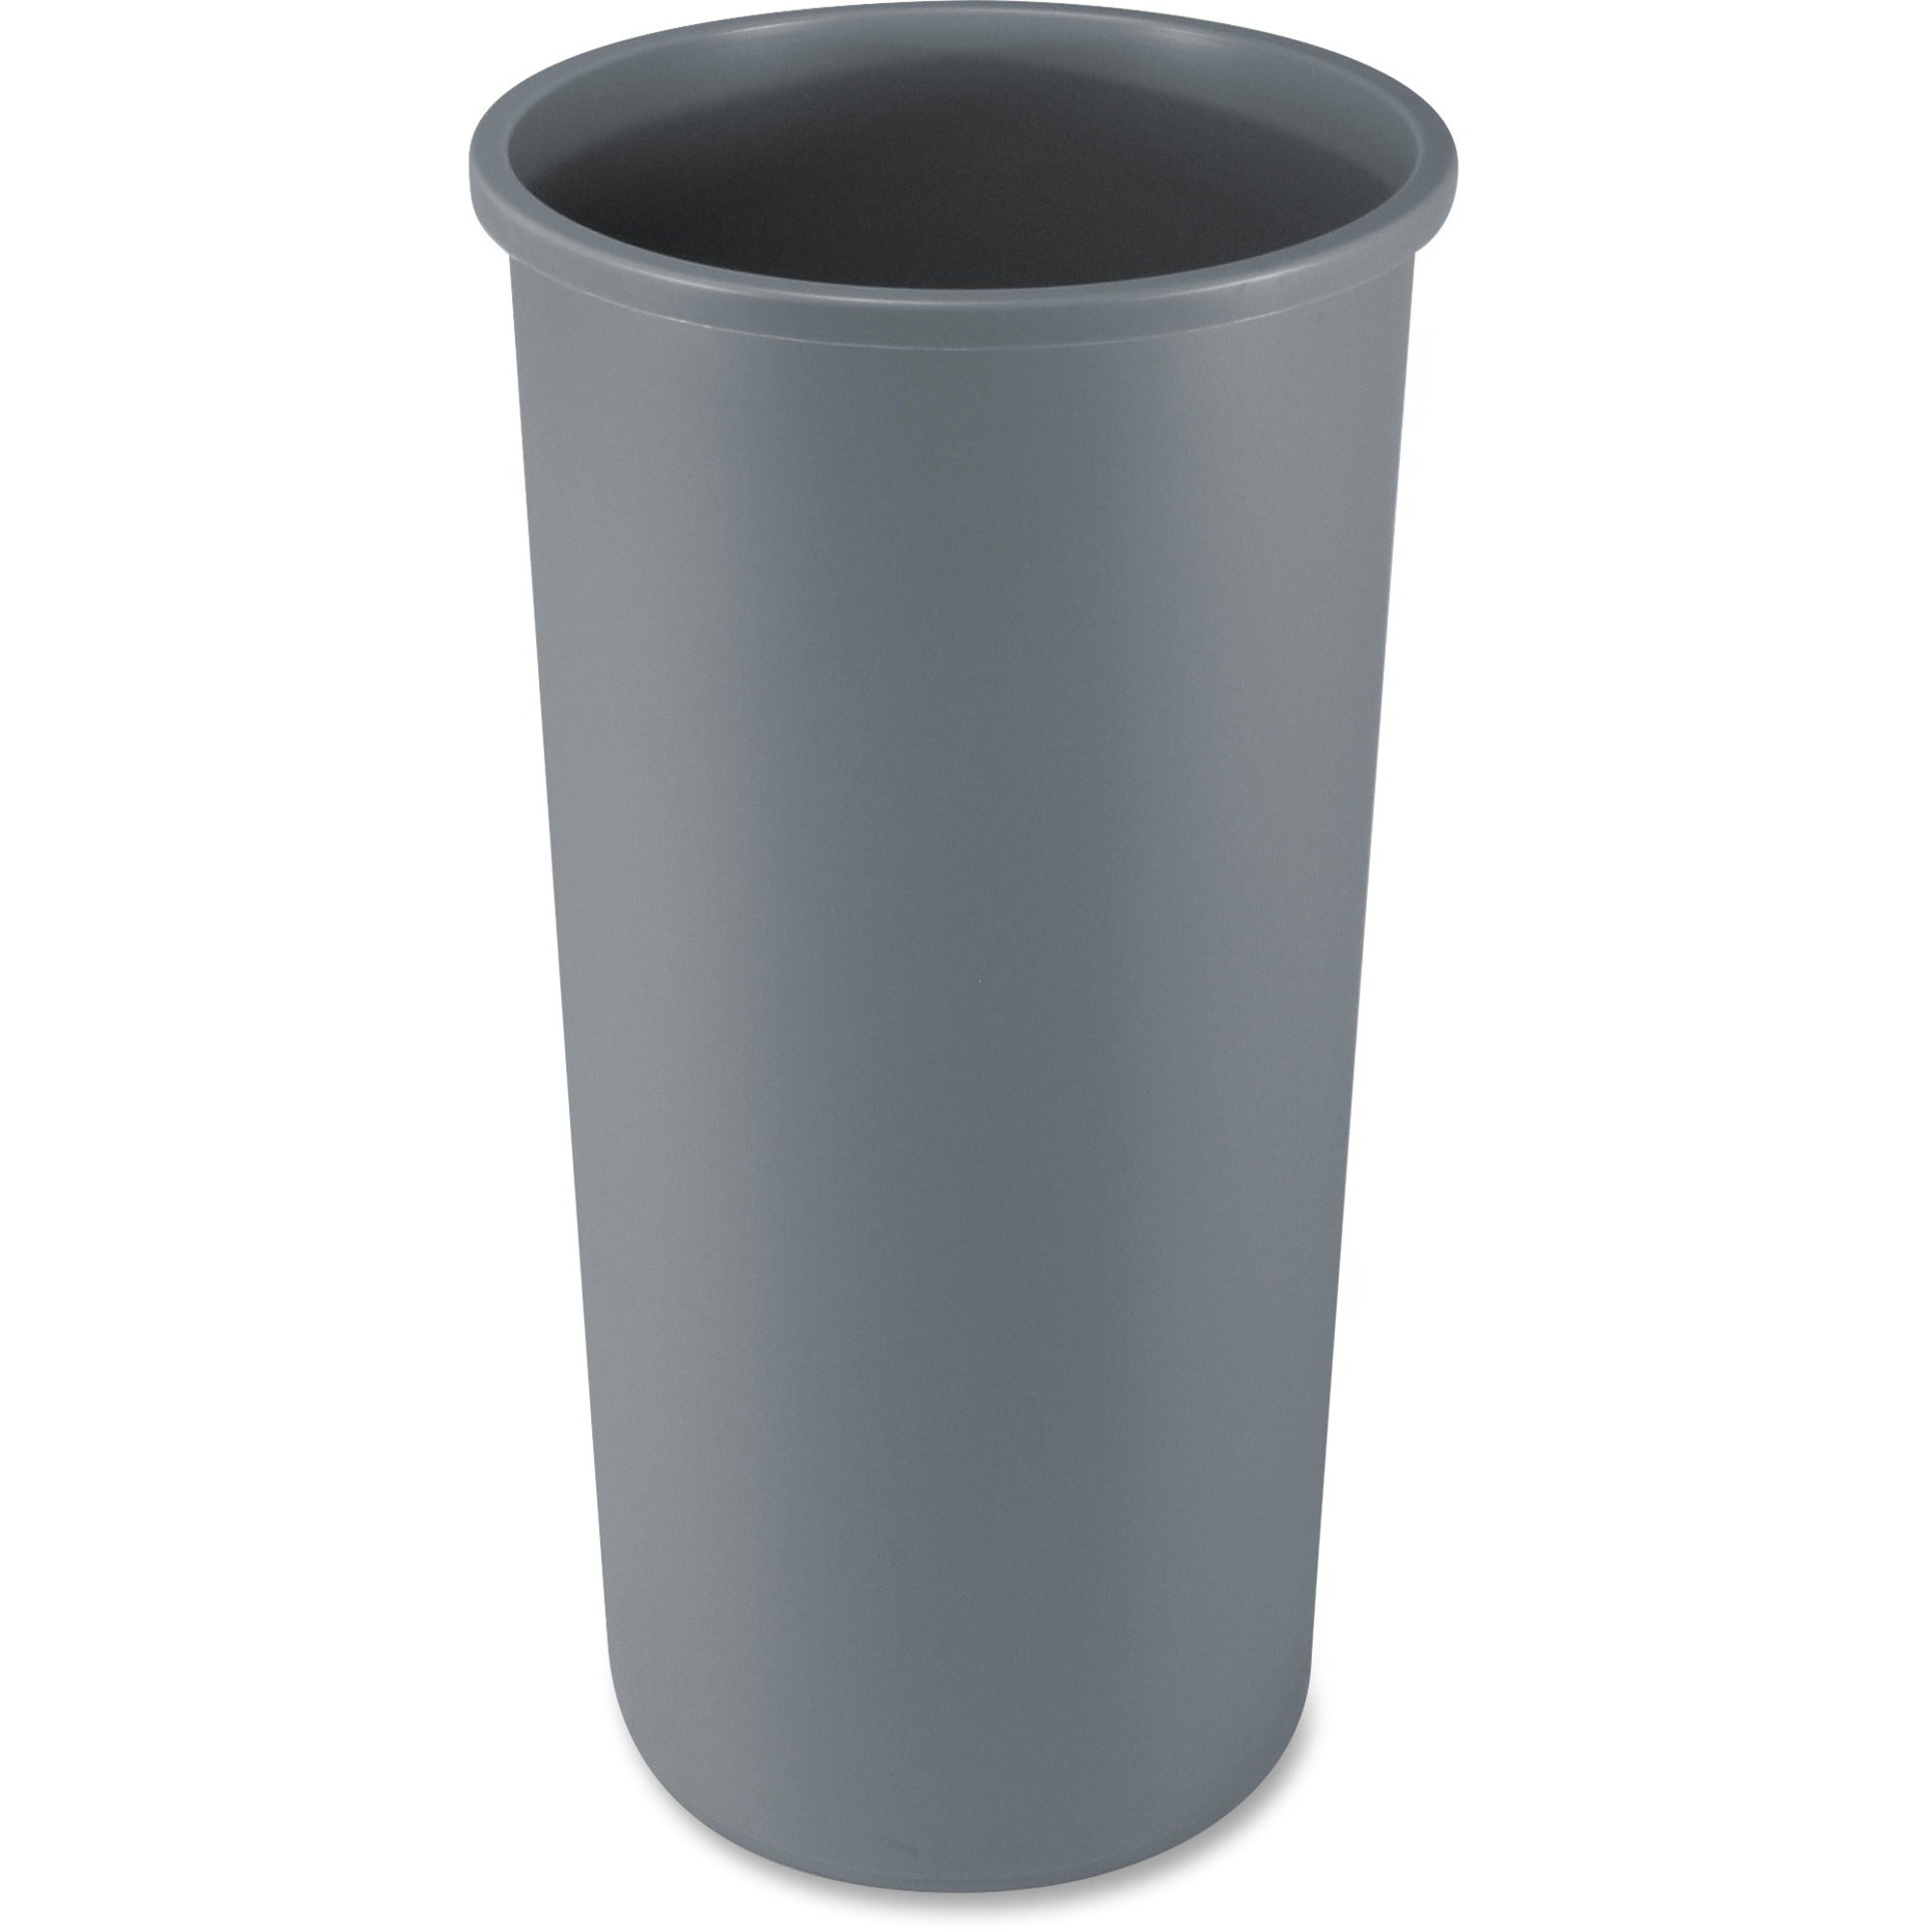 rubbermaid-commercial-untouchable-round-container-22-gal-capacity-round-crack-resistant-durable-301-height-x-158-diameter-linear-low-density-polyethylene-lldpe-gray-4-carton_rcp354600gyct - 1